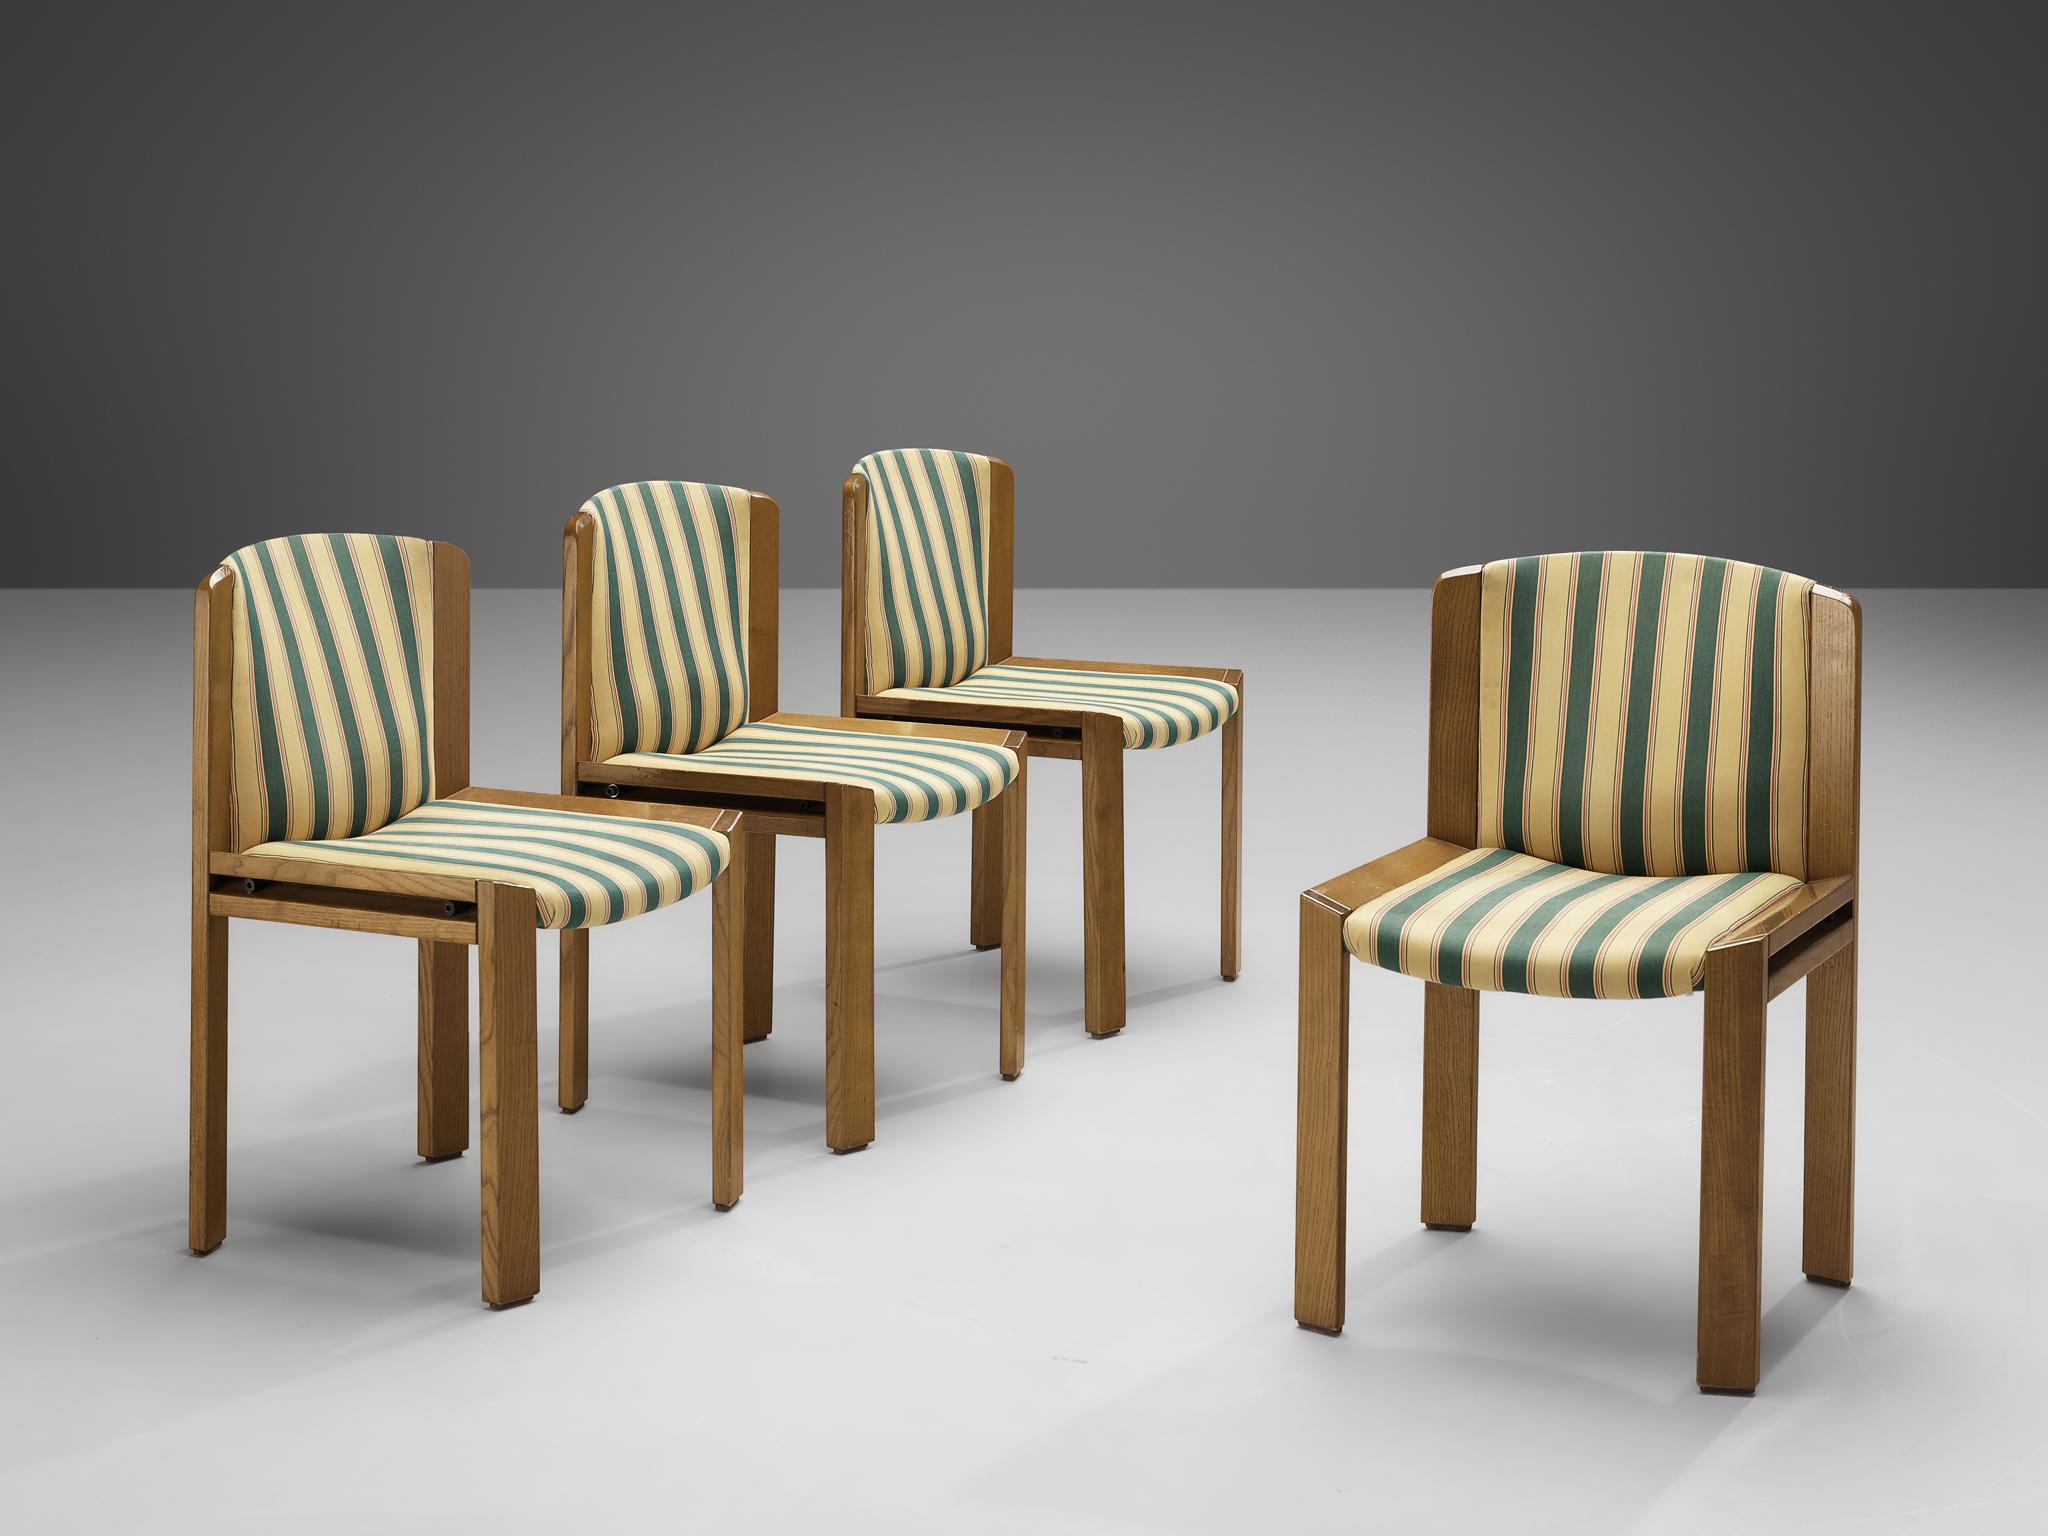 Joe Colombo for Pozzi, set of four dining chairs model '300', fabric, oak, Italy, 1966

Functionalist set of four dining chairs designed by Joe Colombo in 1966. Colombo's fascination with functionality meant he always focused on the user, which